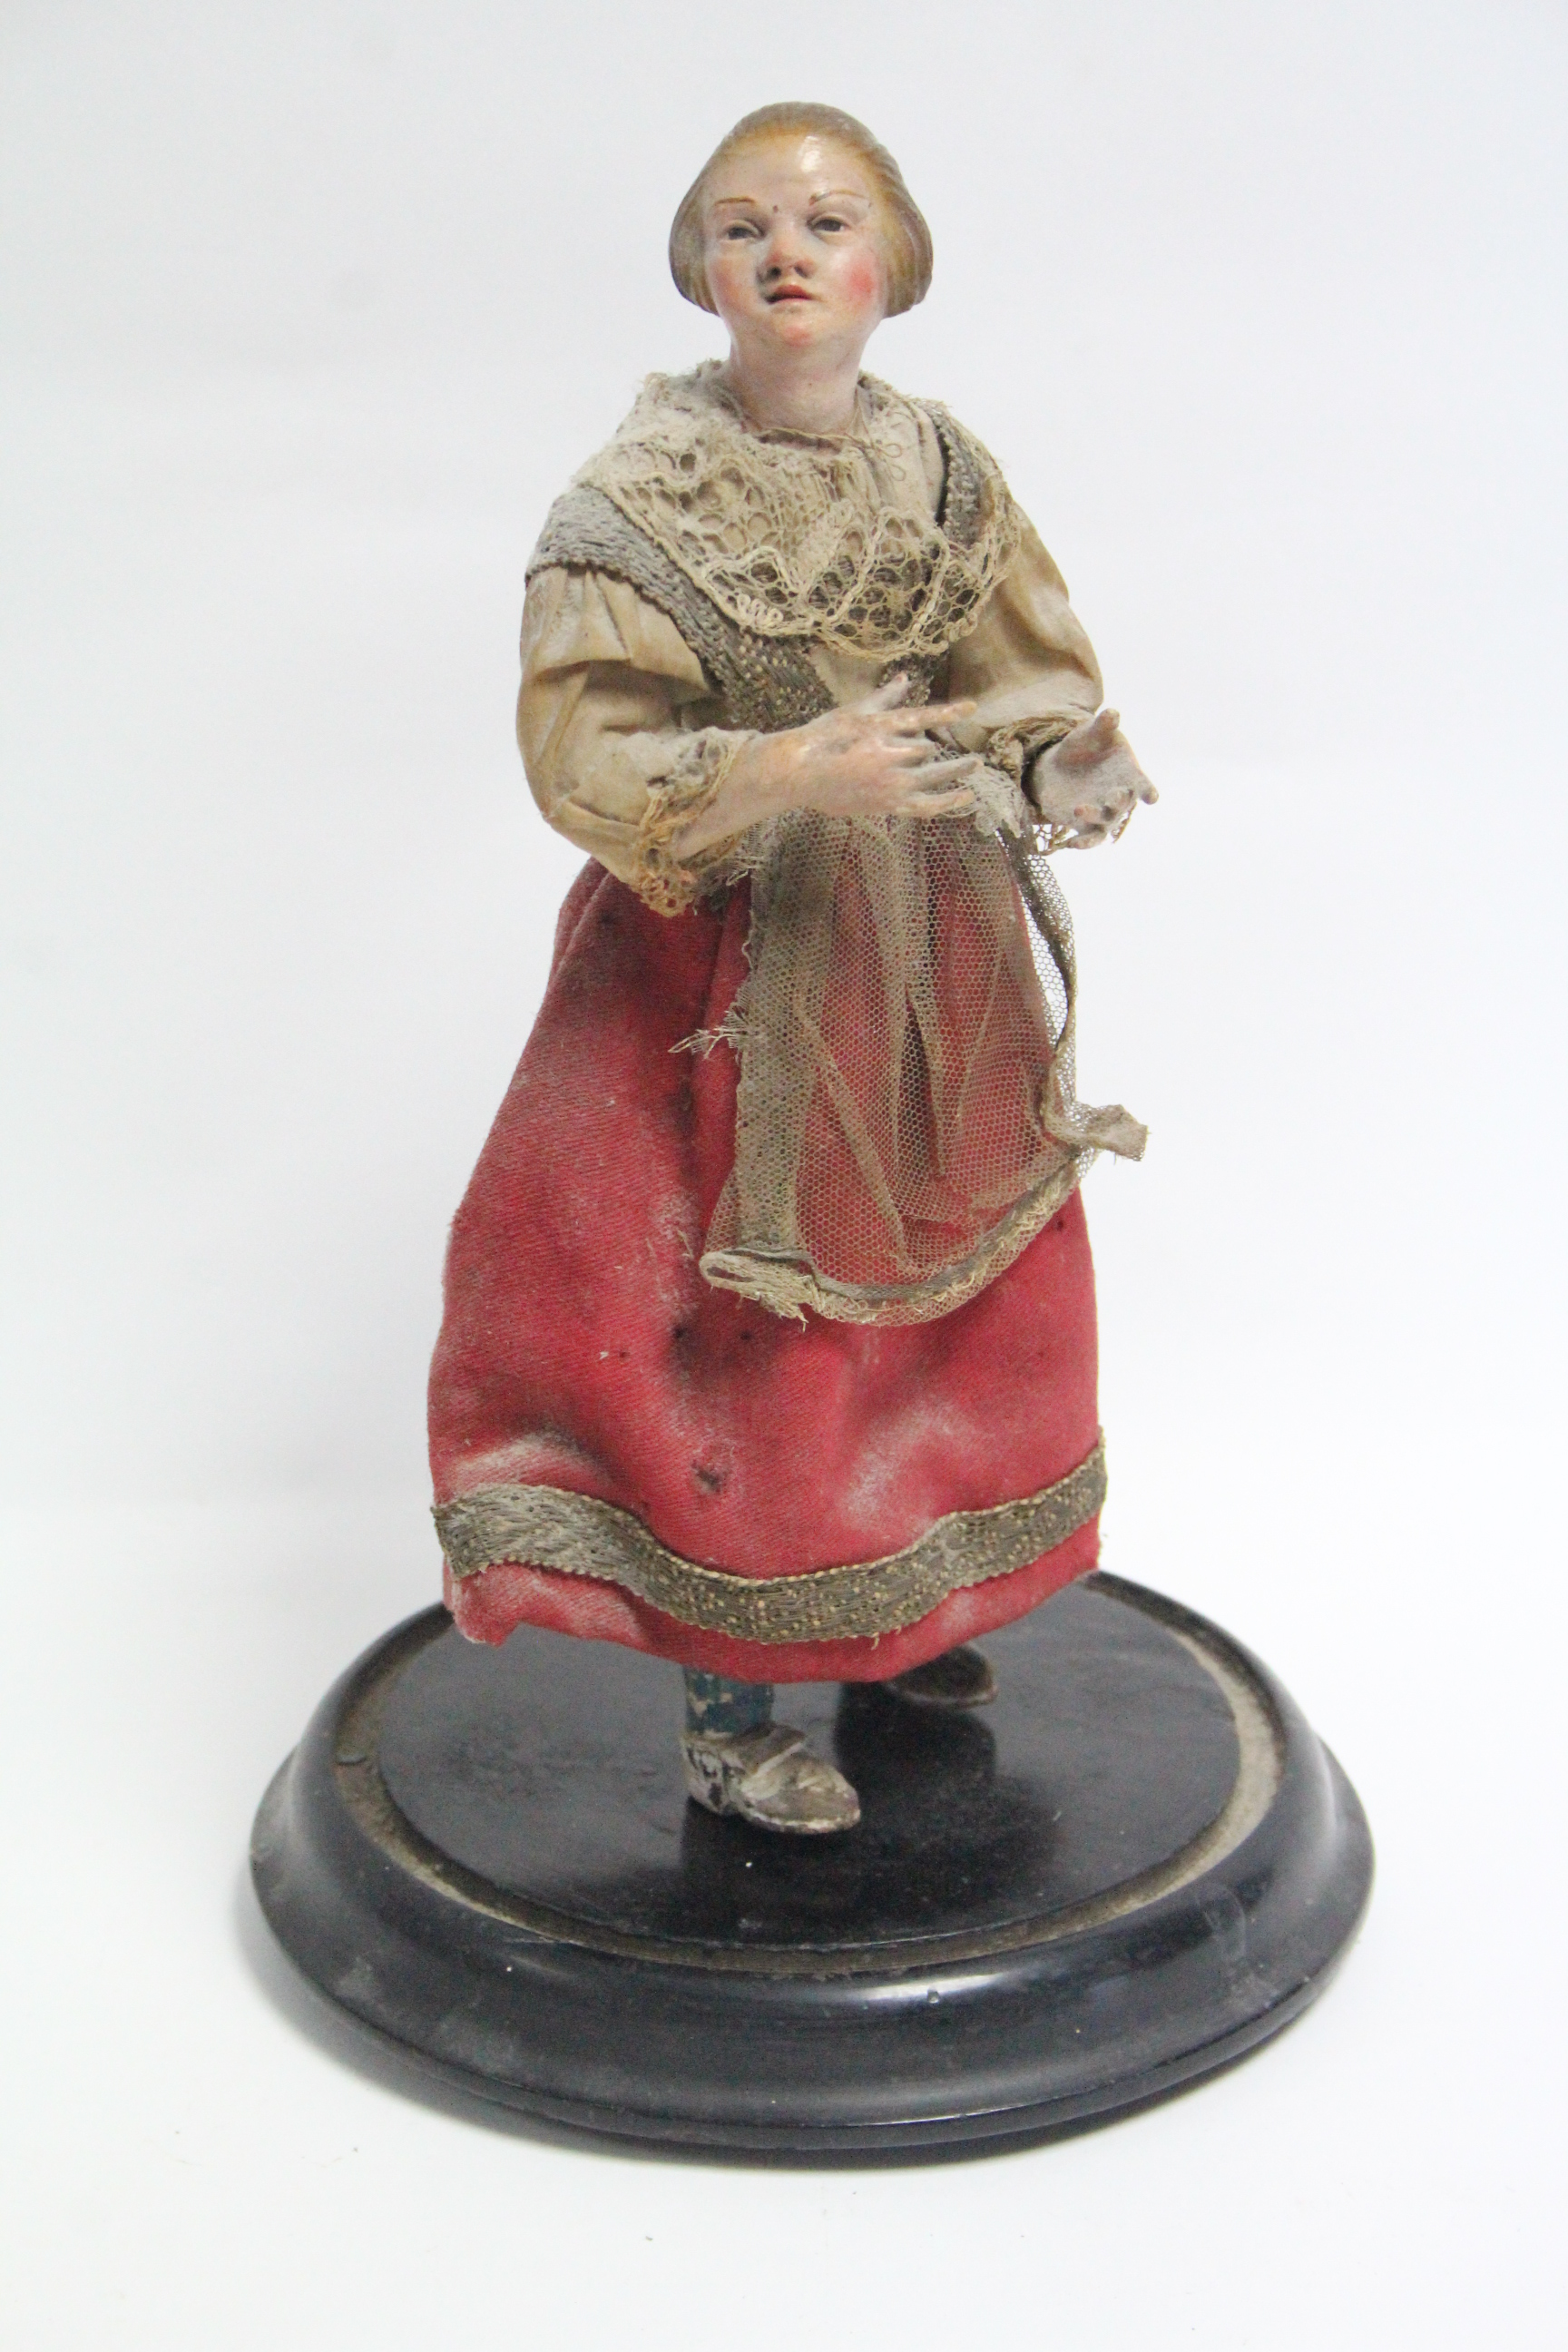 A painted composition peddler doll mounted on ebonised wooden plinth, 11½” high.